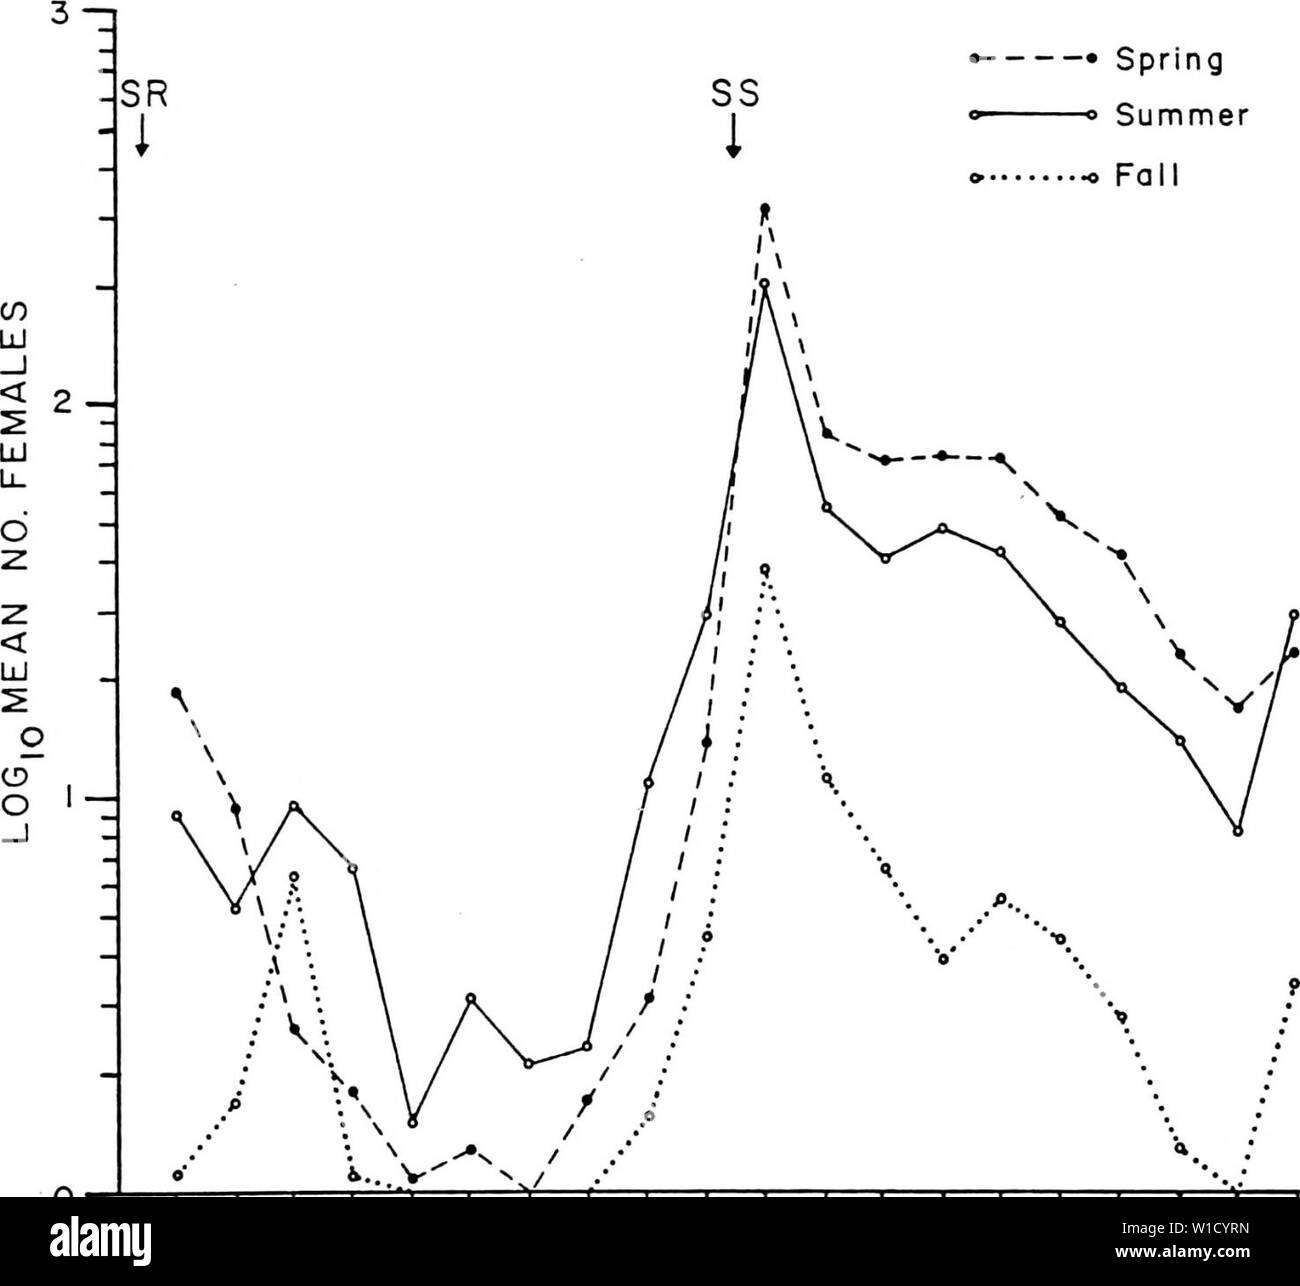 Archive image from page 80 of Diel and seasonal activities of. Diel and seasonal activities of Culicoides spp. Near Yankeetown, Florida . dielseasonalacti00lill Year: 1985  69    1—r 2 1—1 1 T 1 1 1 1 1 1 1 1 1 1 1—T 1 4 6 8 10 12 14 16 18 20 COLLECTION PERIOD Figure 13. Diel periodicity of C. furens females collected in a vehicle-mounted trap during different seasons. Stock Photo